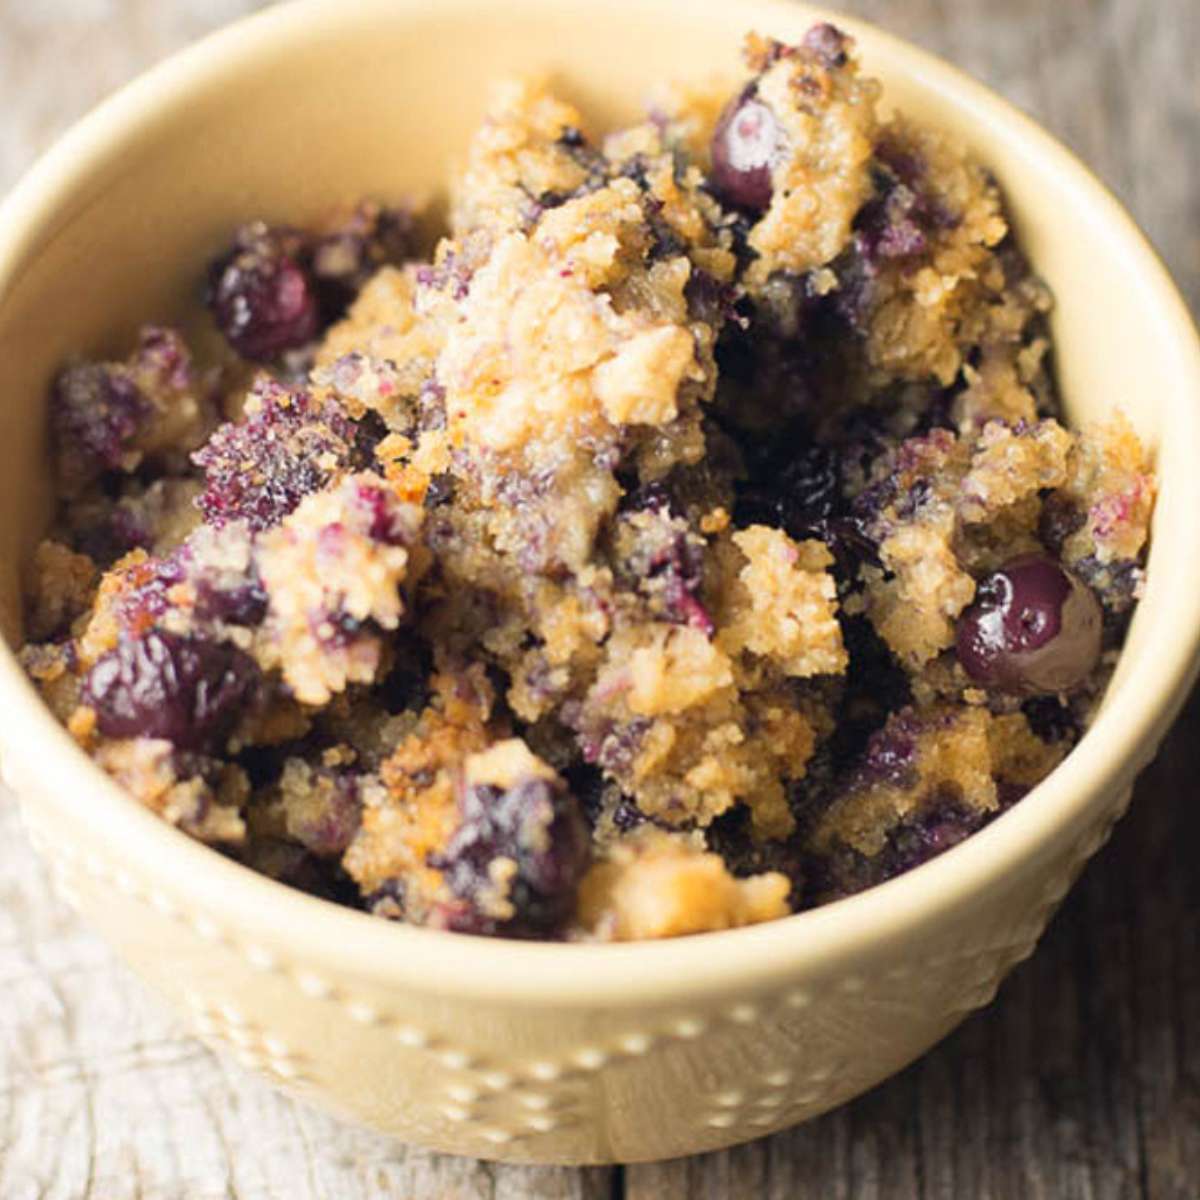 Bowl of slow cooker blueberry oatmeal casserole.